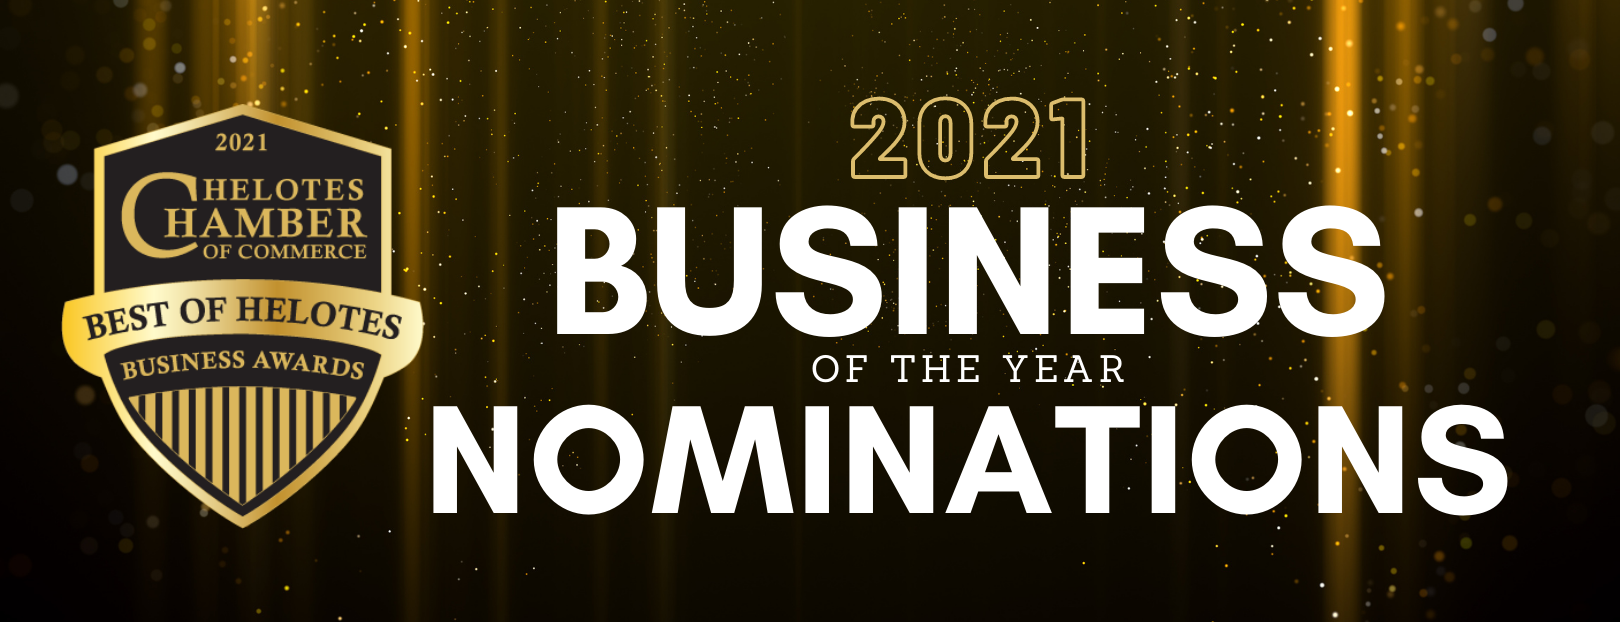 Business of the Year Nominations